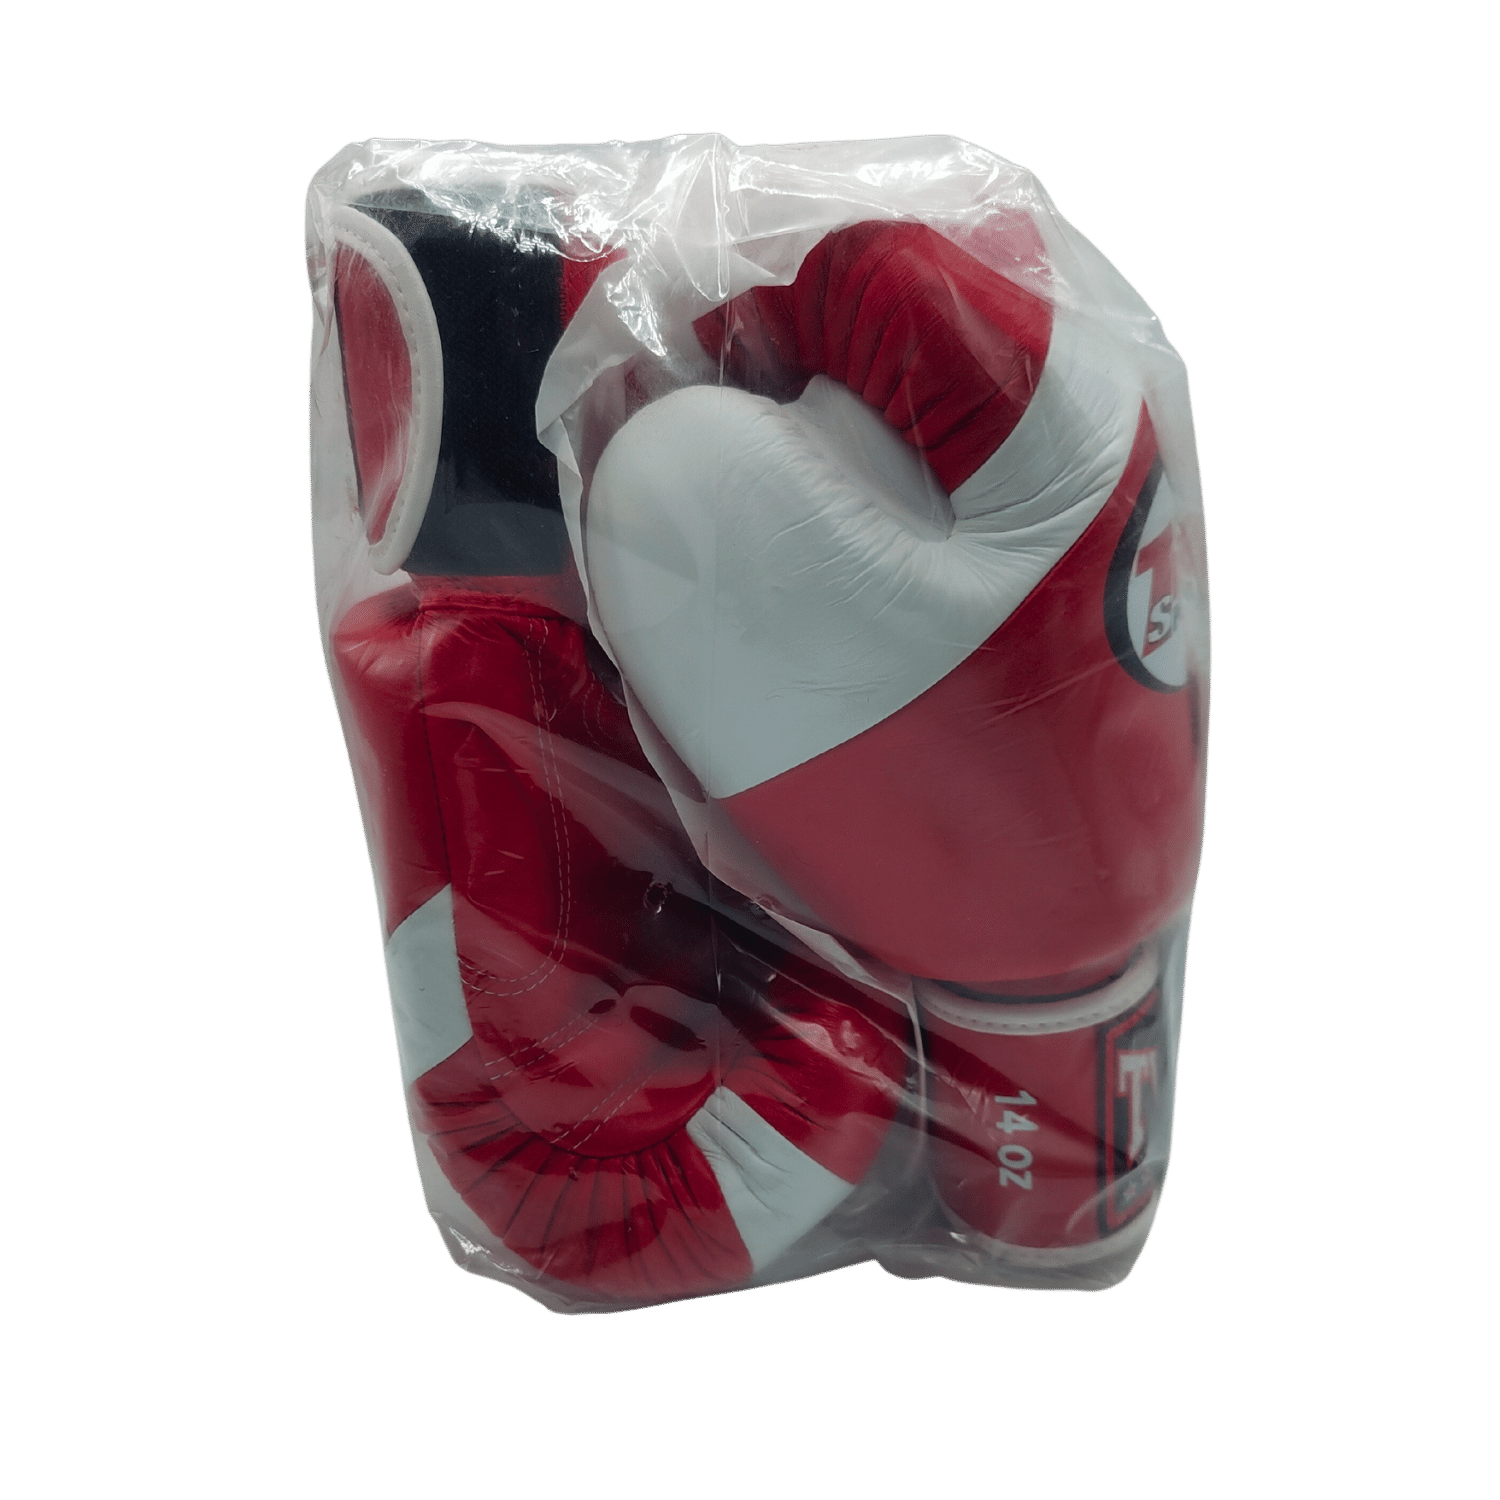 Twins Duo Colour 14oz Boxing Gloves - Red & White by Twins in a plastic bag.